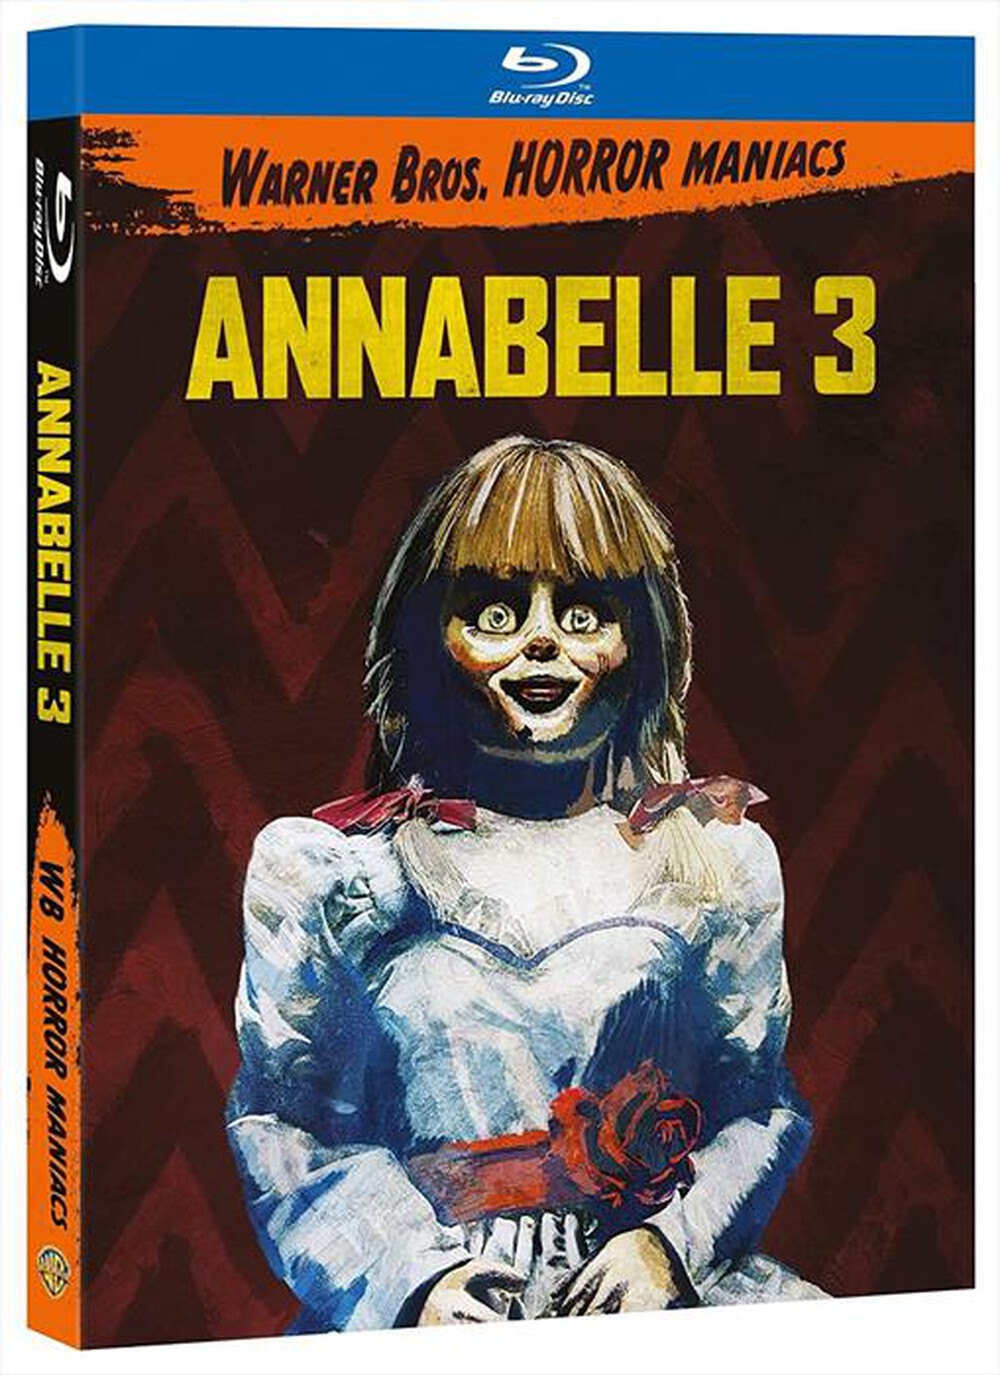 "WARNER HOME VIDEO - Annabelle 3 (Horror Maniacs Collection)"